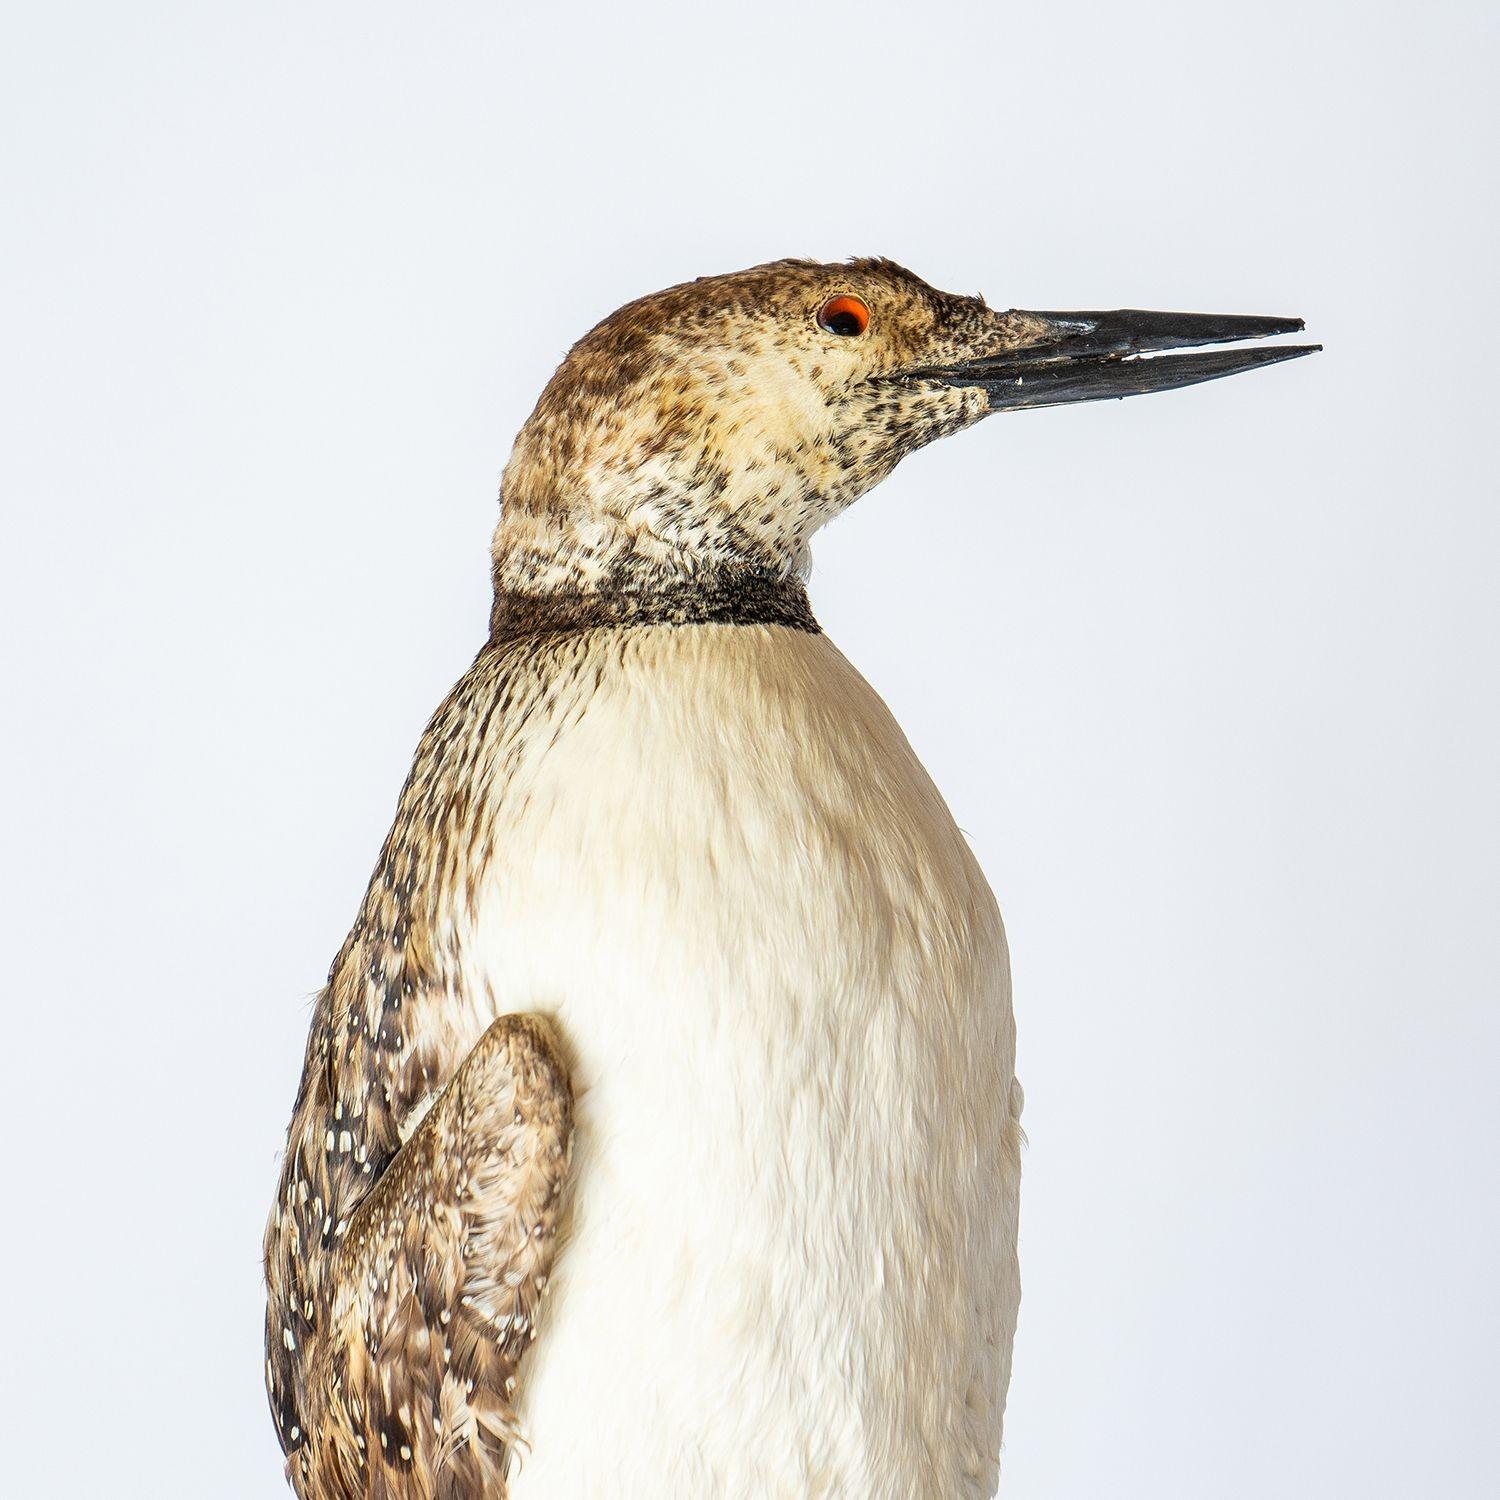 British Antique Mounted Taxidermy Loon on Naturalistic Base, Early 20th Century Bird For Sale